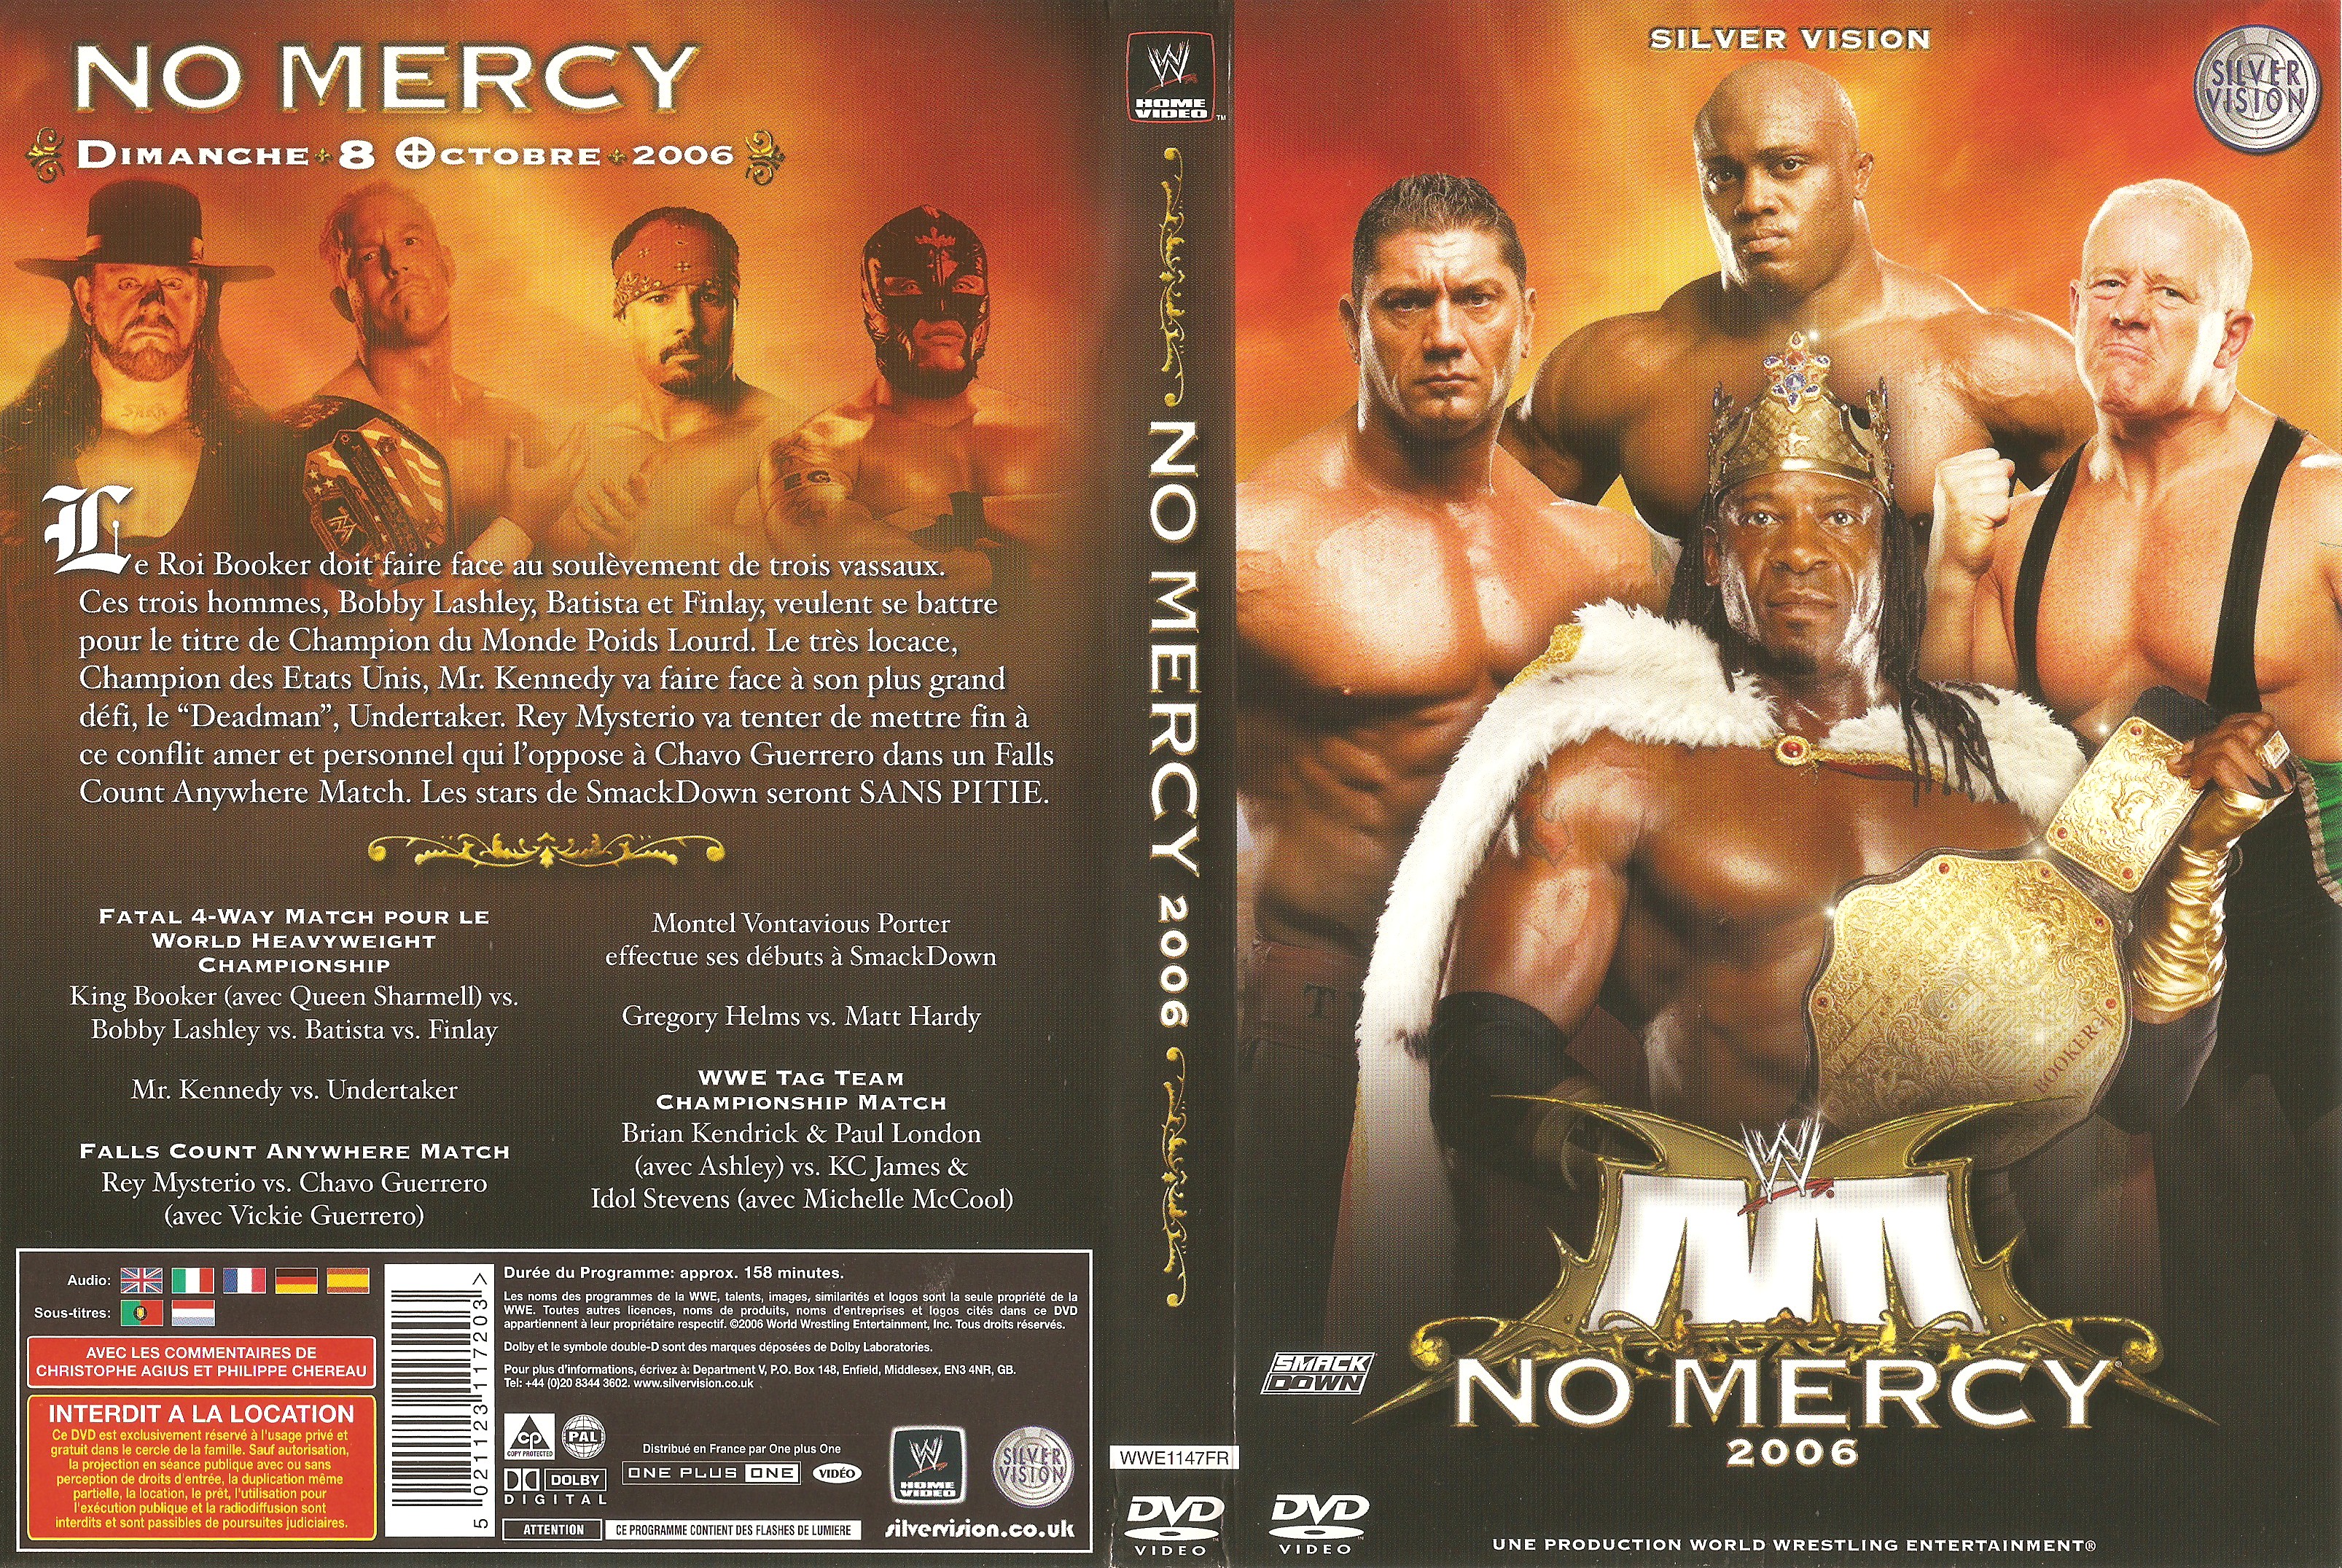 Jaquette DVD WWE No Mercy 2006